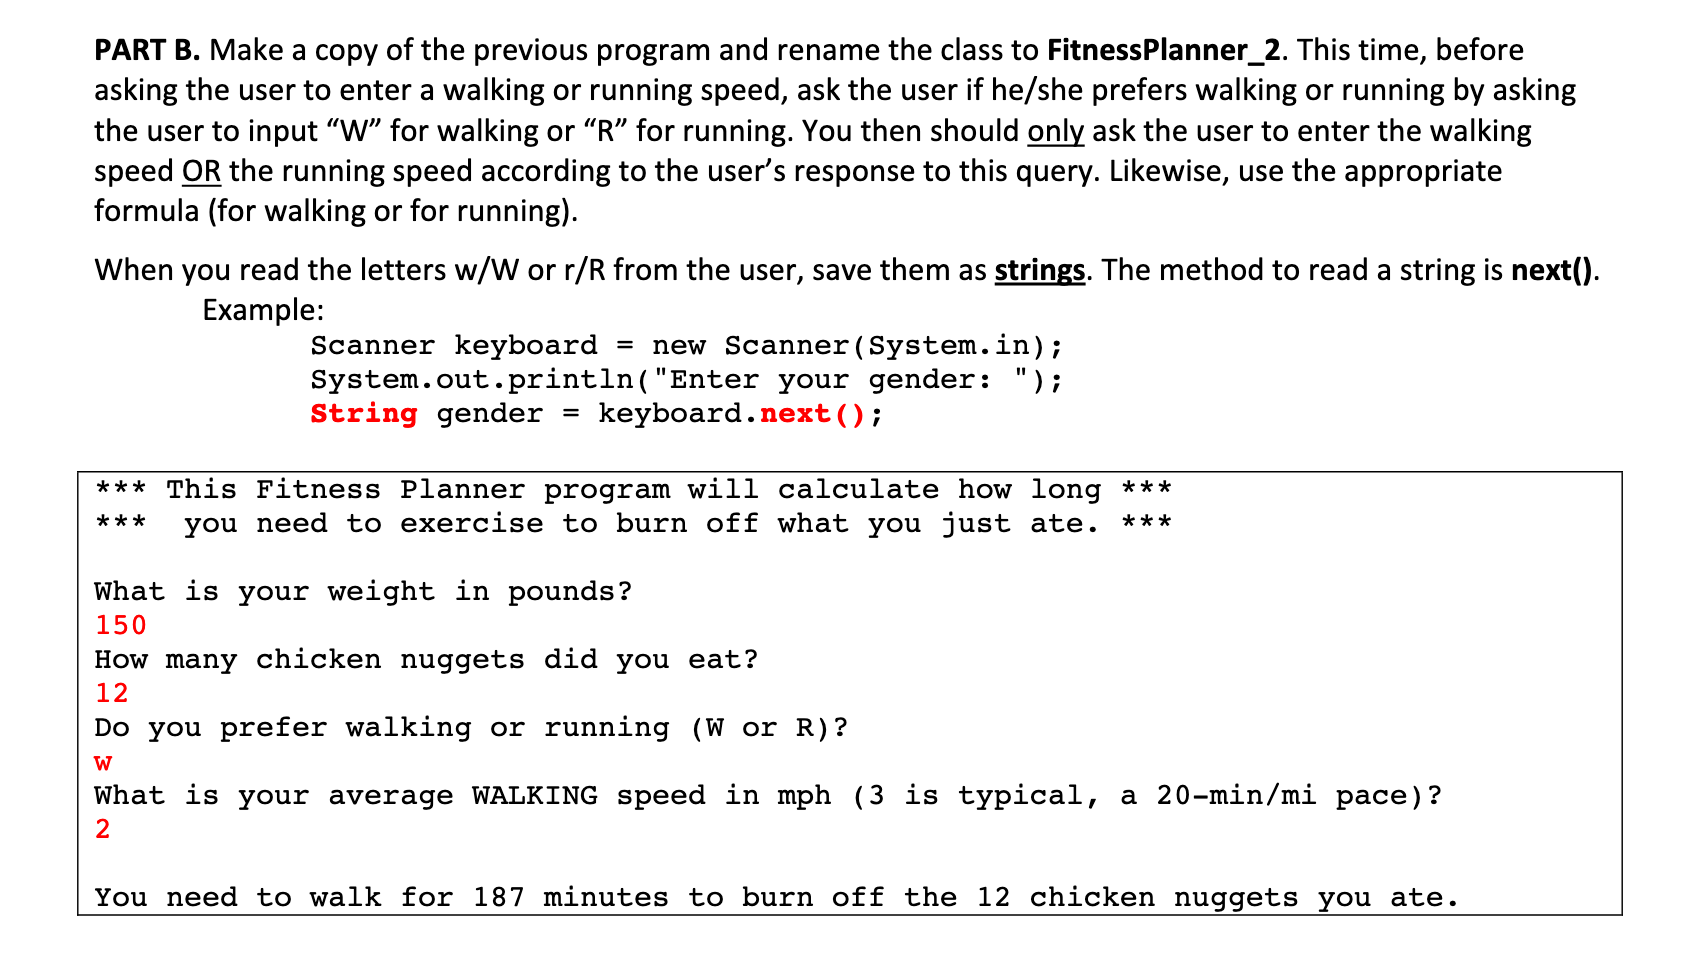 PART B. Make a copy of the previous program and rename the class to FitnessPlanner_2. This time, before
asking the user to enter a walking or running speed, ask the user if he/she prefers walking or running by asking
the user to input "W" for walking or "R" for running. You then should only ask the user to enter the walking
speed OR the running speed according to the user's response to this query. Likewise, use the appropriate
formula (for walking or for running).
When you read the letters w/W or r/R from the user, save them as strings. The method to read a string is next().
Example:
Scanner keyboard
System.out.println("Enter your gender: ");
String gender
= new Scanner (System.in);
= keyboard.next();
*** This Fitness Planner program will calculate how long ***
you need to exercise to burn off what you just ate.
***
***
What is your weight in pounds?
150
How many chicken nuggets did you eat?
12
Do you prefer walking or running (W or R)?
What is your average WALKING speed in mph (3 is typical, a 20-min/mi pace)?
2
You need to walk for 187 minutes to burn off the 12 chicken nuggets you ate.
